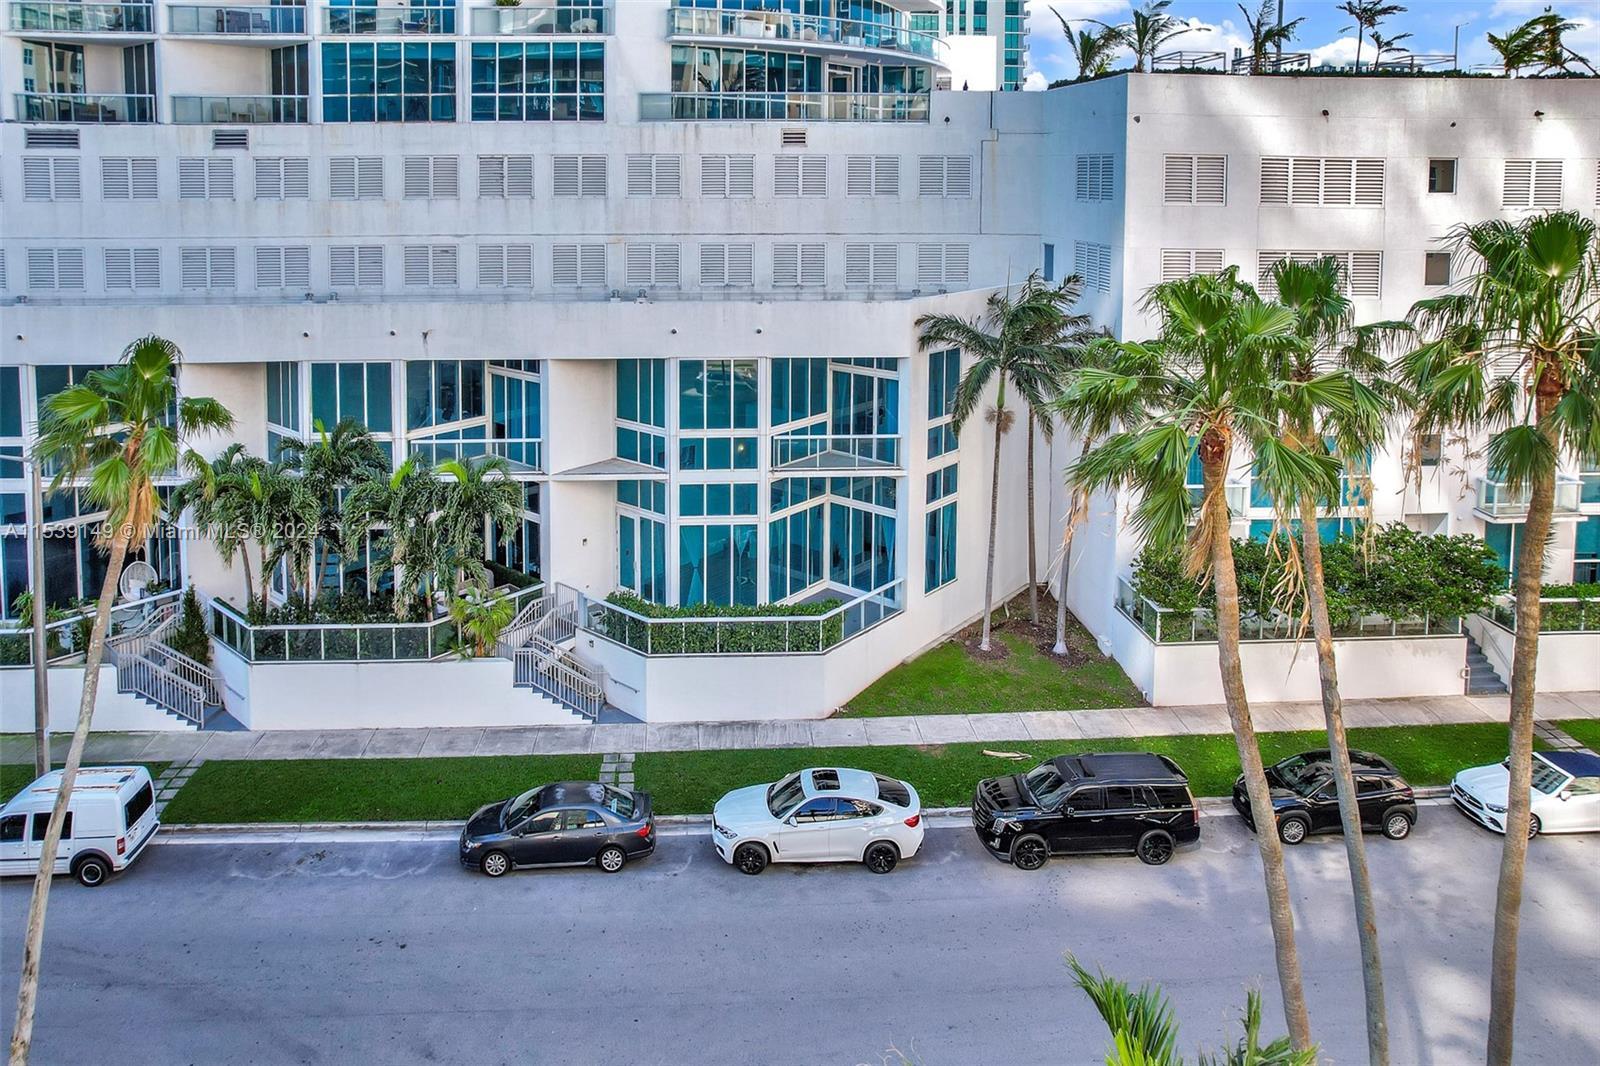 Unique loft-style townhome located in the heart of Edgewater, just a short distance from Biscayne Ba